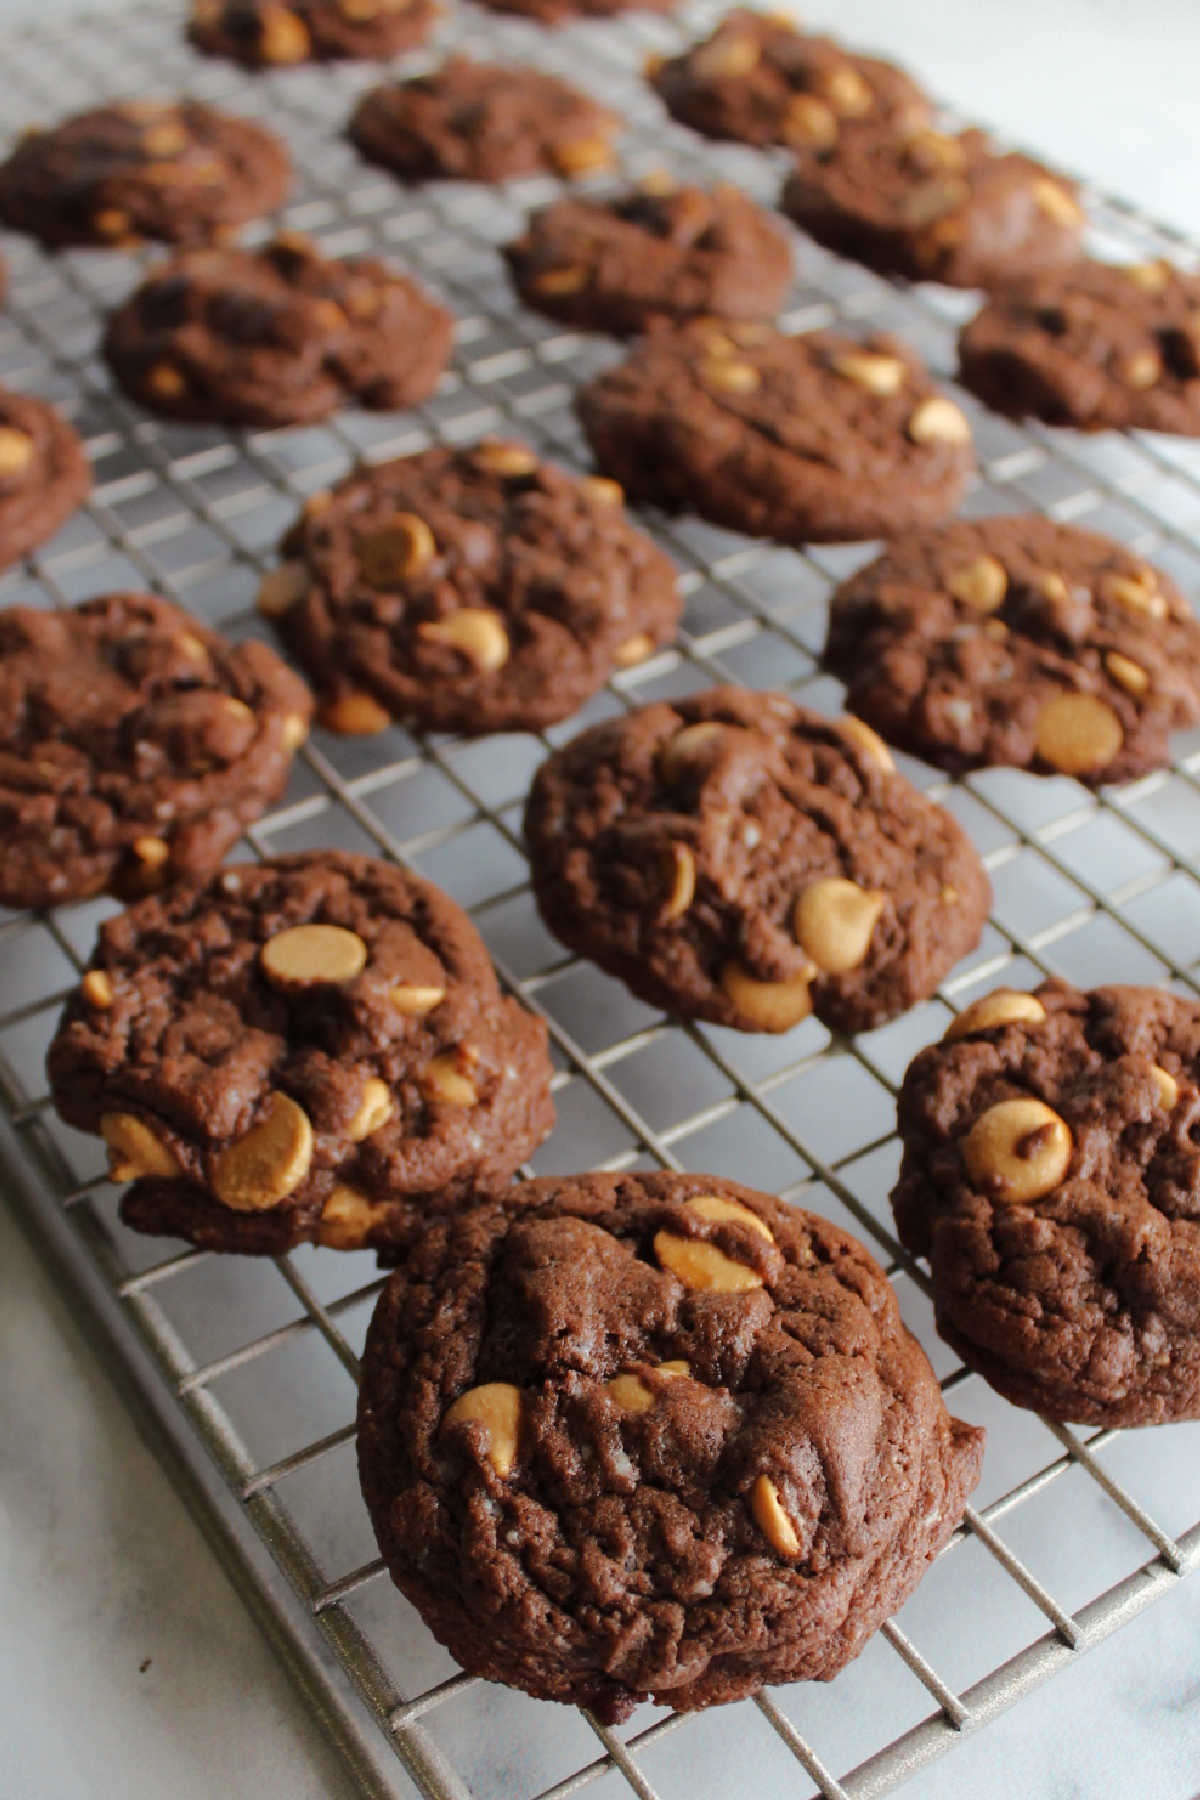 Freshly baked chocolate cake mix cookies with peanut butter chips on wire cooling rack.